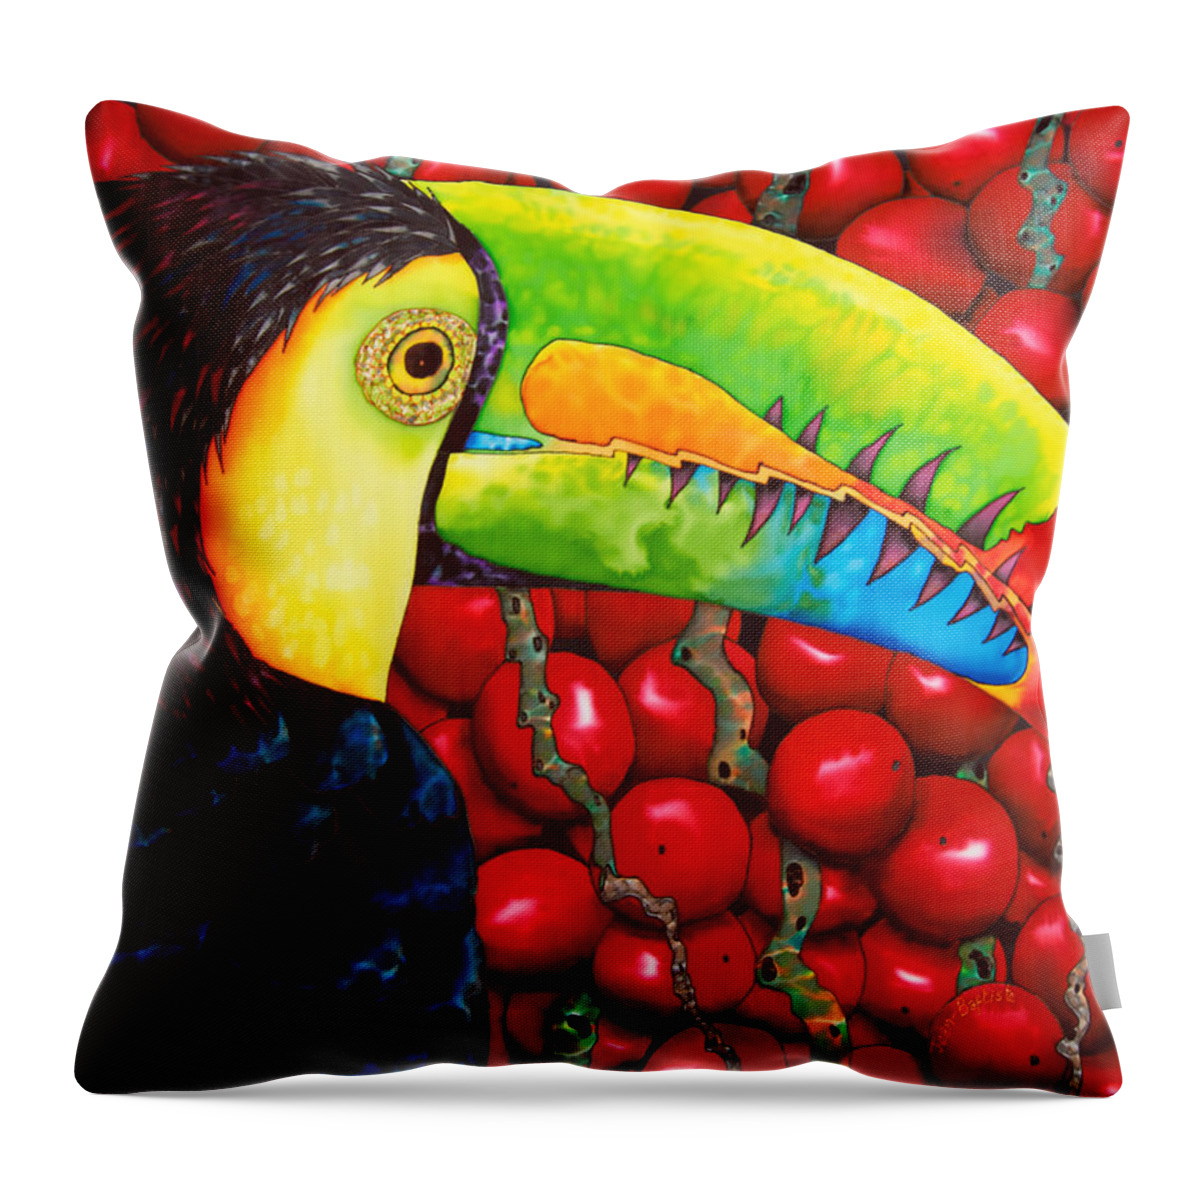  Watercolor Throw Pillow featuring the painting Rainbow Toucan by Daniel Jean-Baptiste